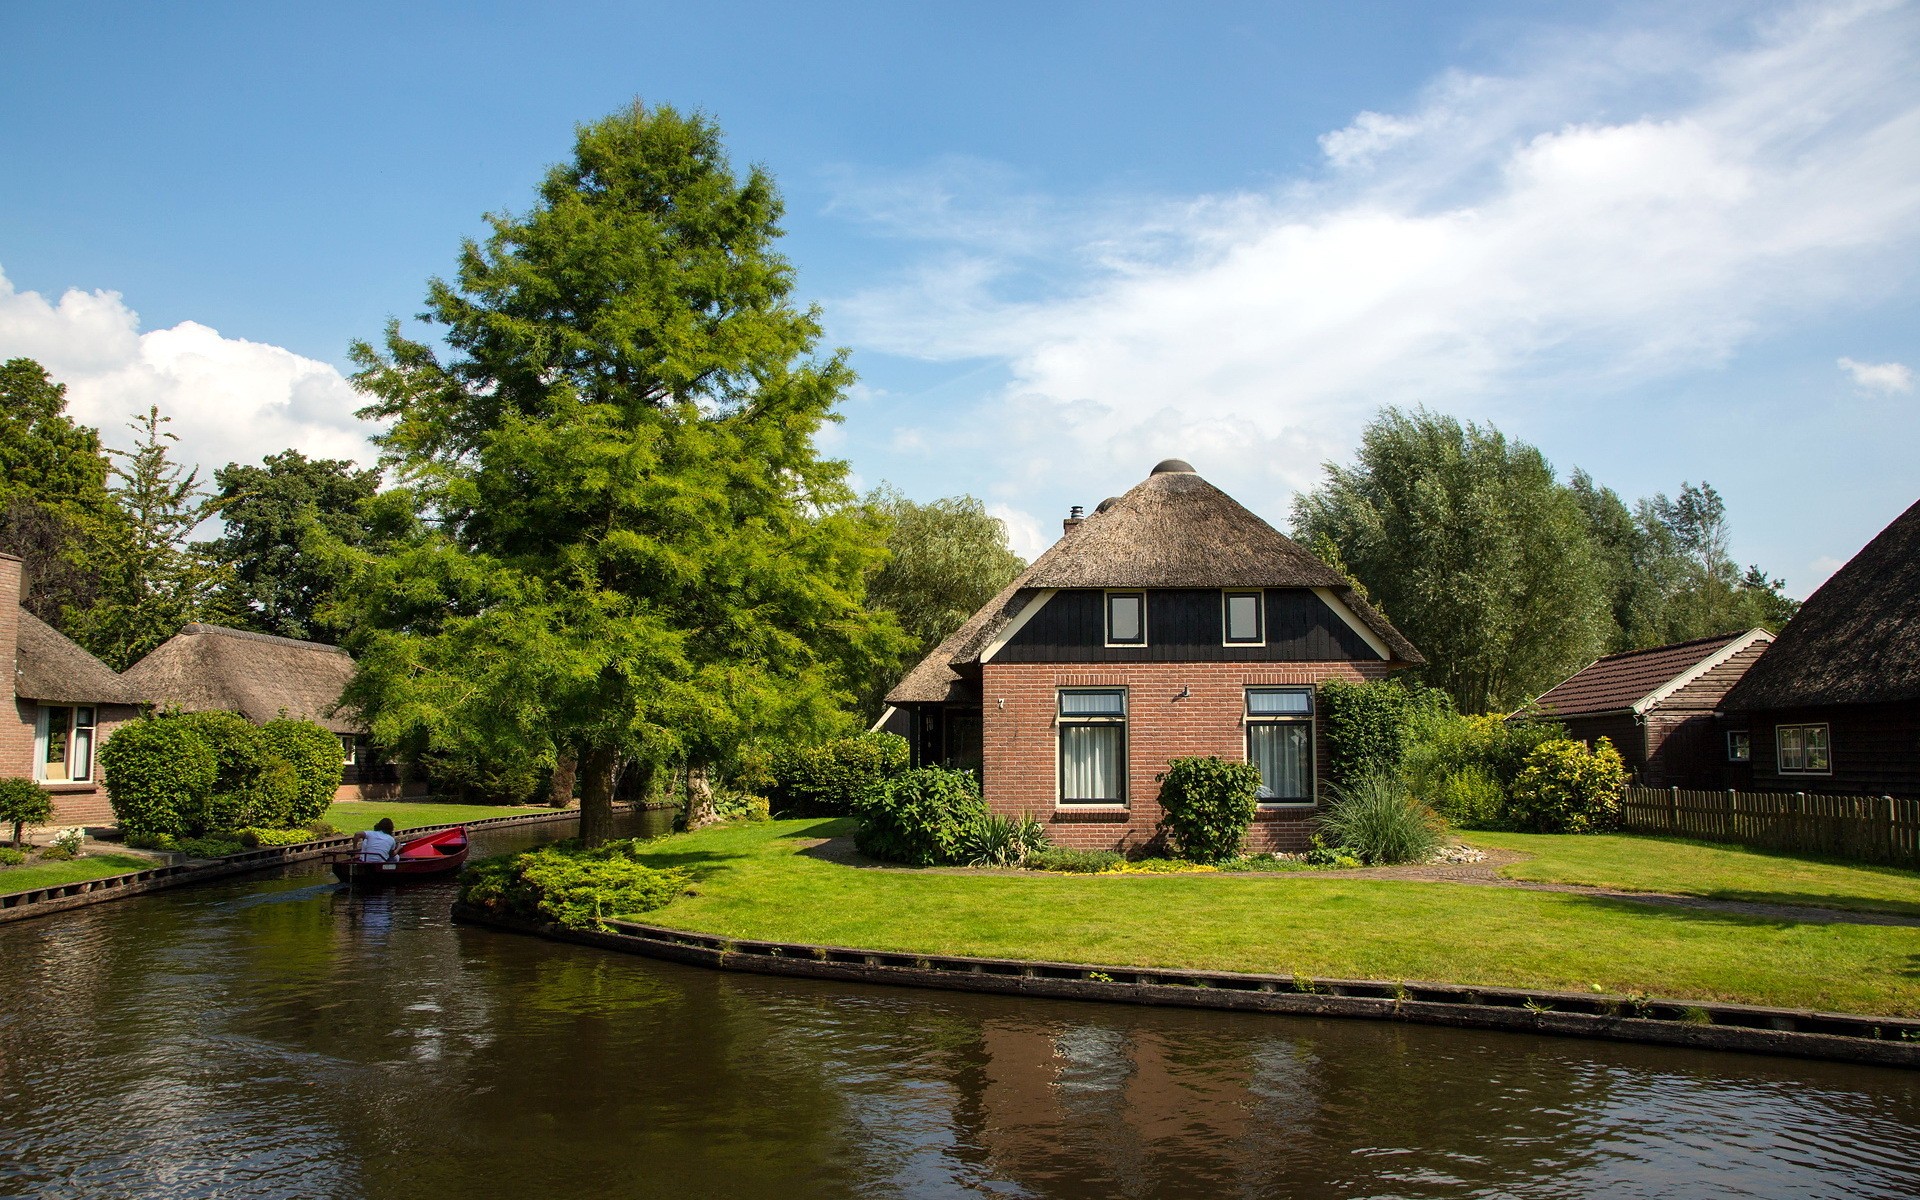 General 1920x1200 trees water house urban Netherlands canal boat